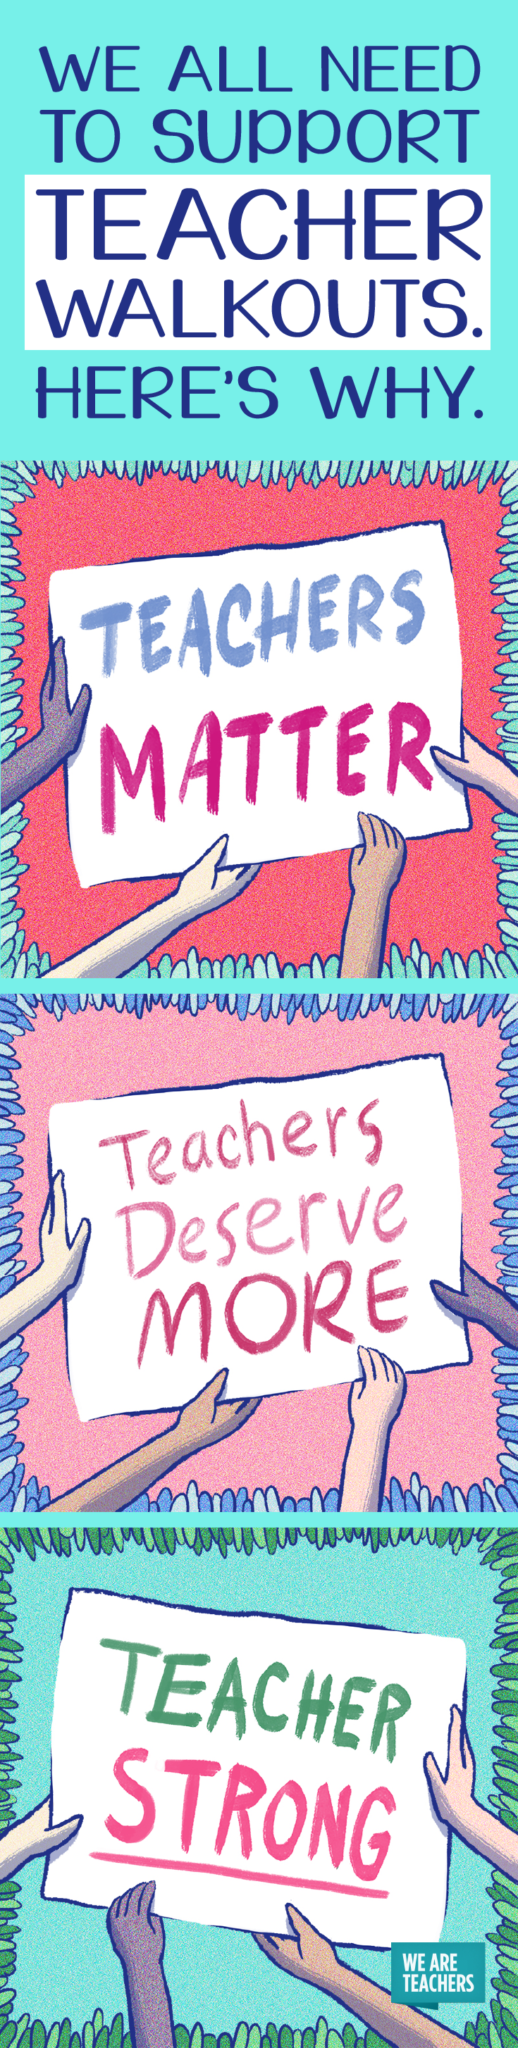 We all need to support teacher walkouts